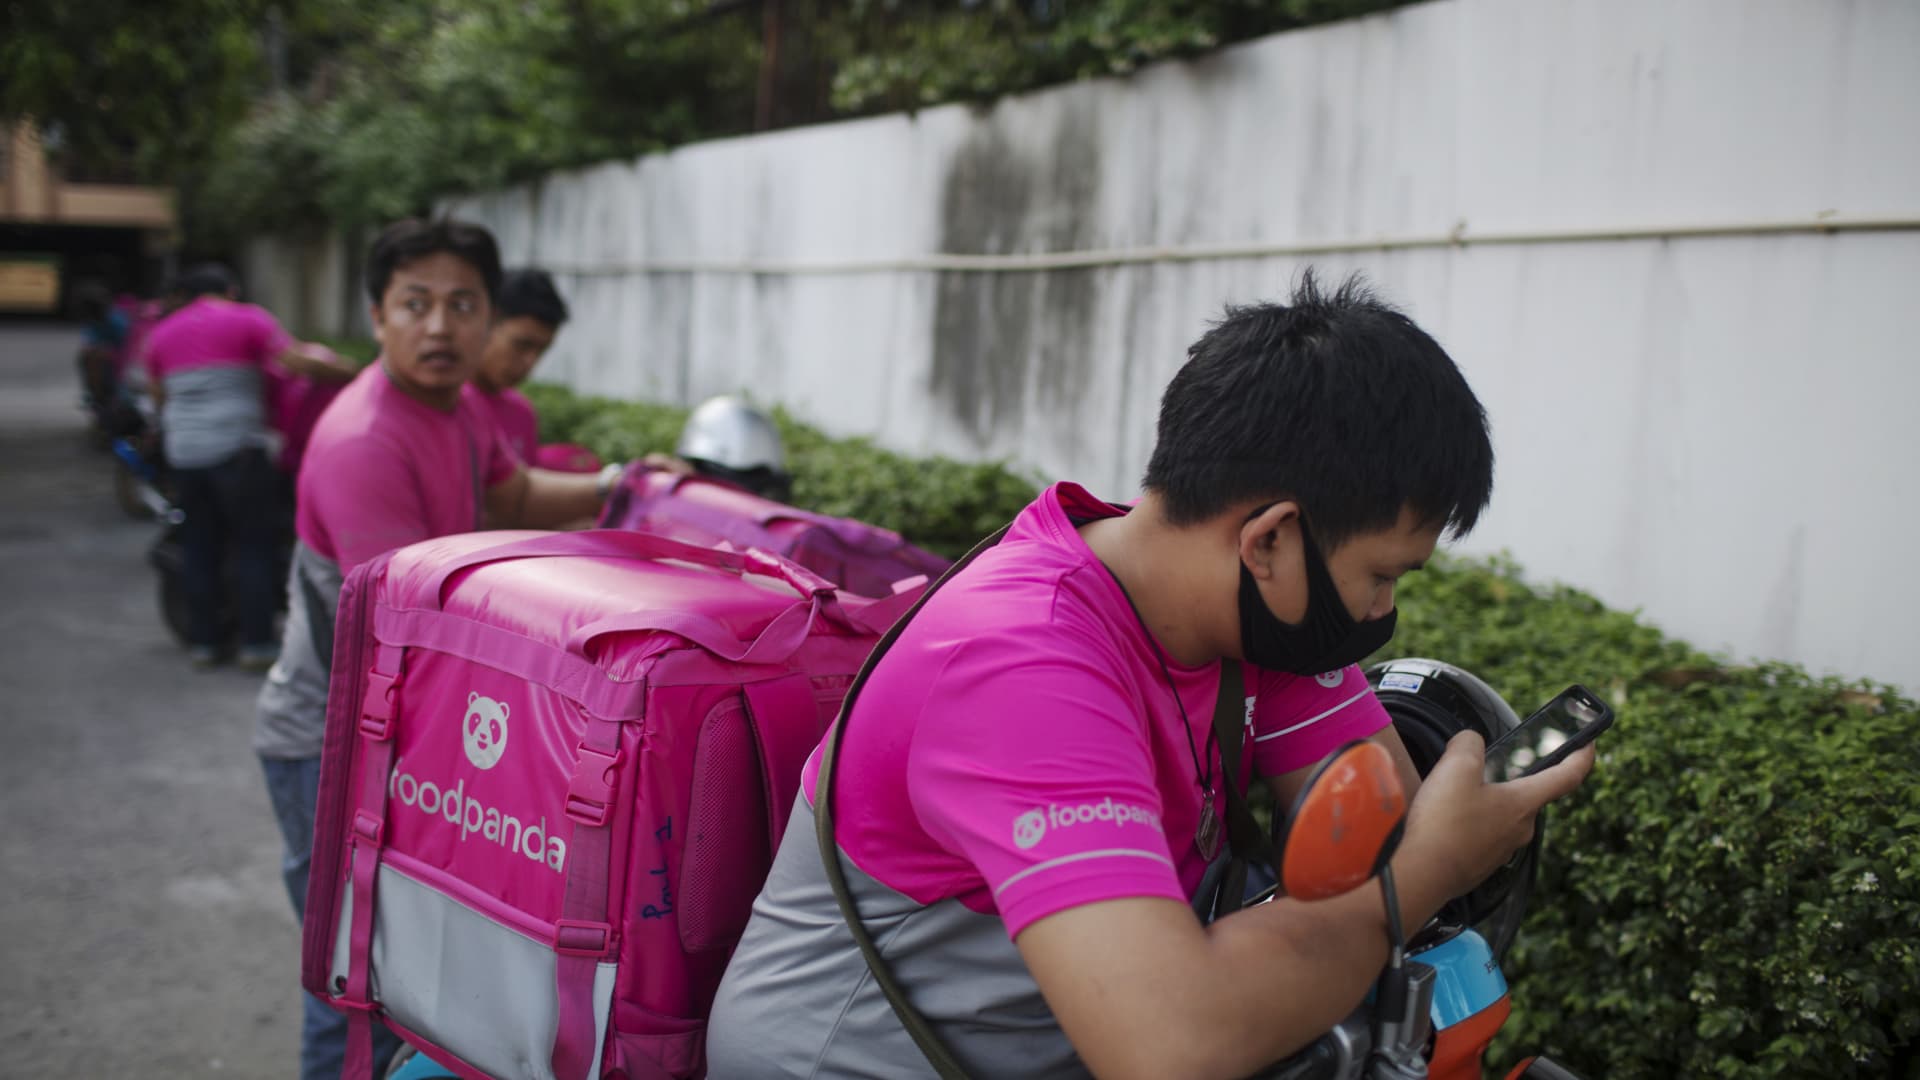 Foodpanda confirms talks to sell part of its Asia business, layoffs